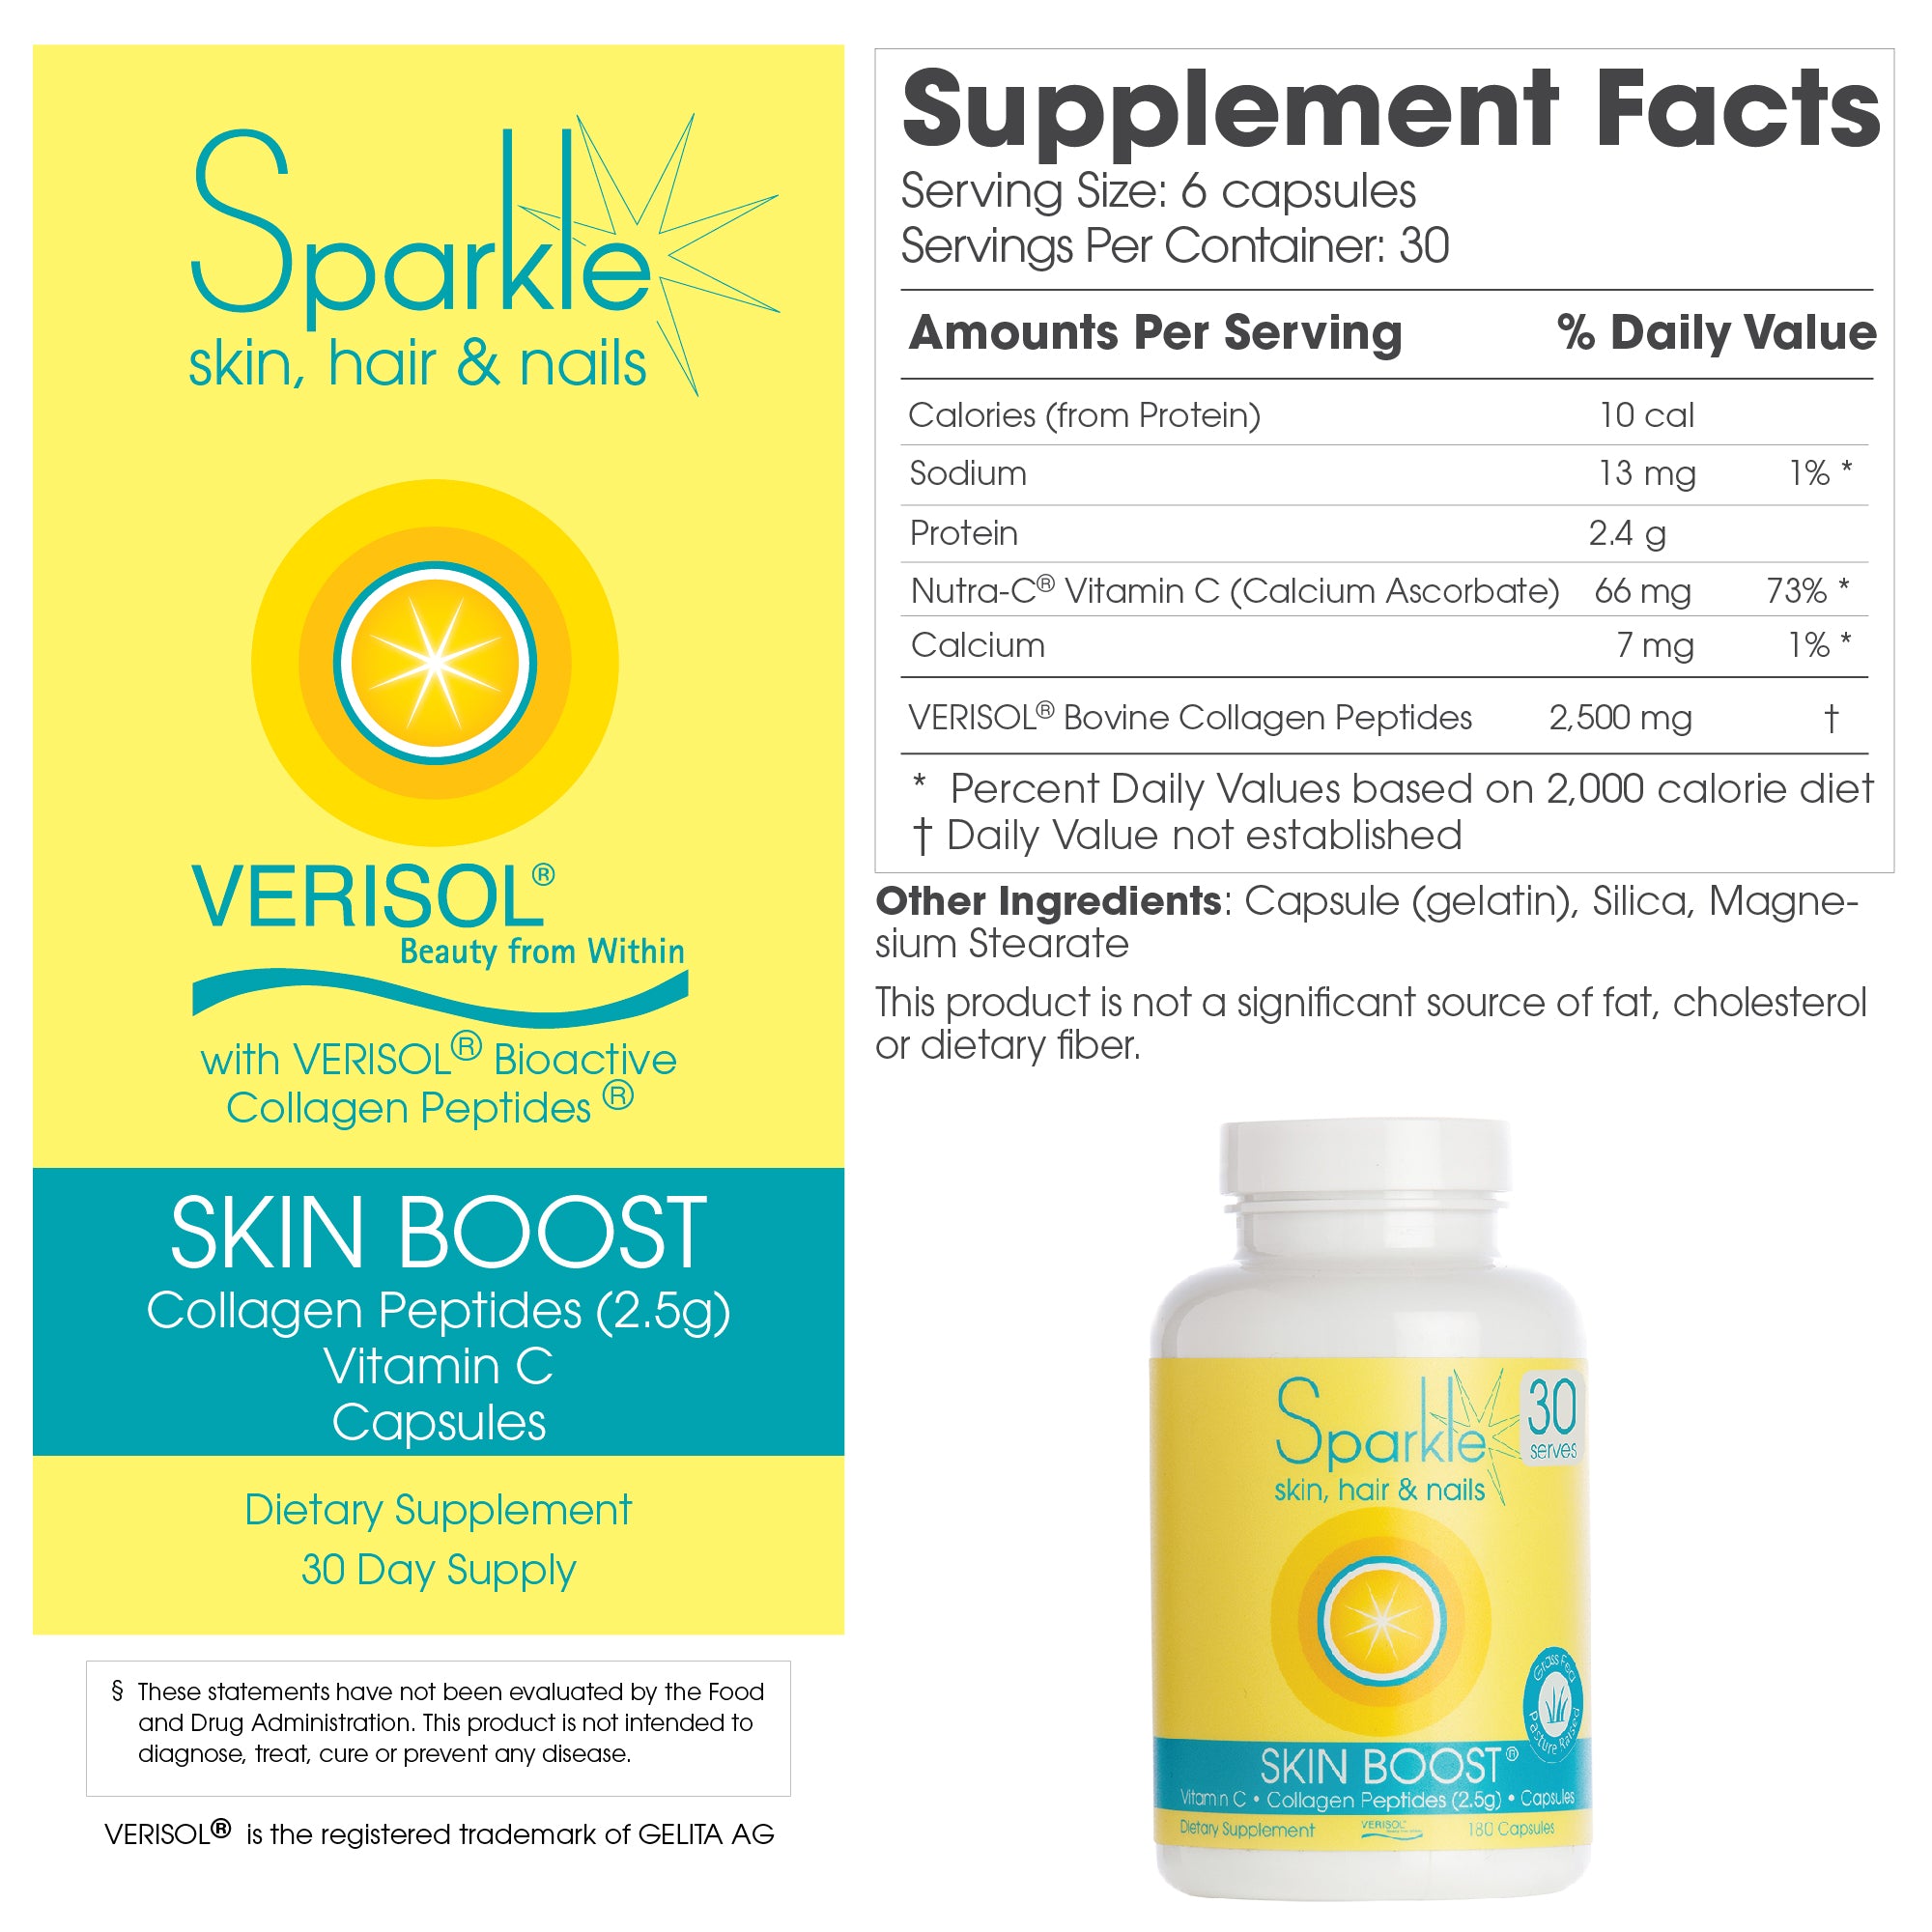 Sparkle Skin Boost Capsules Supplement Facts